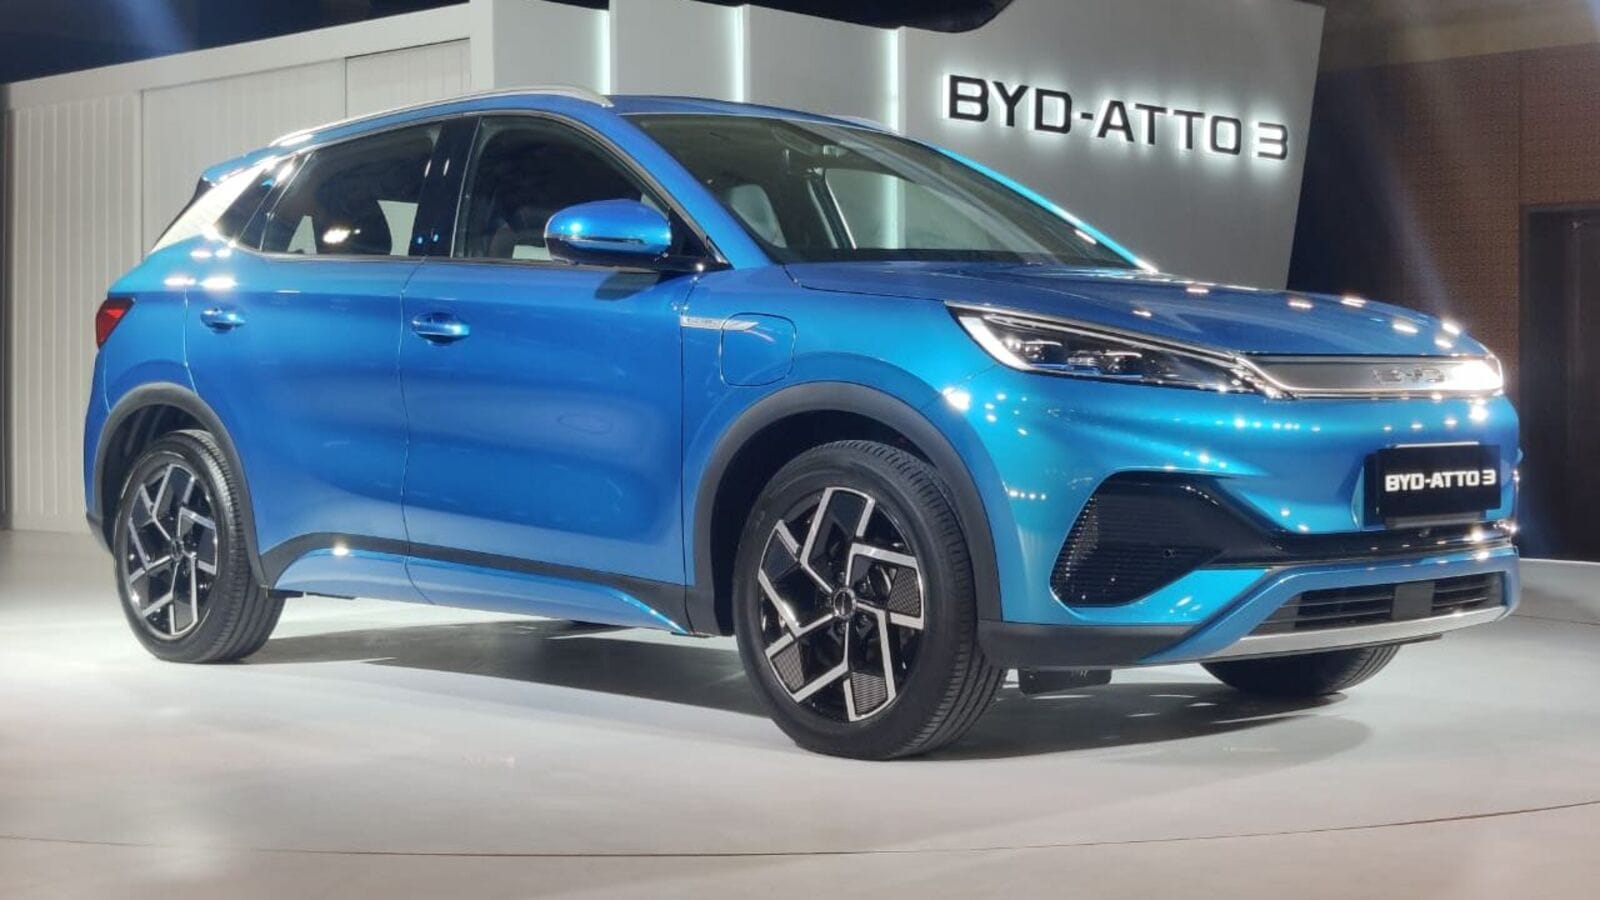 BYD's first electric SUV in India offers more range than Nexon EV